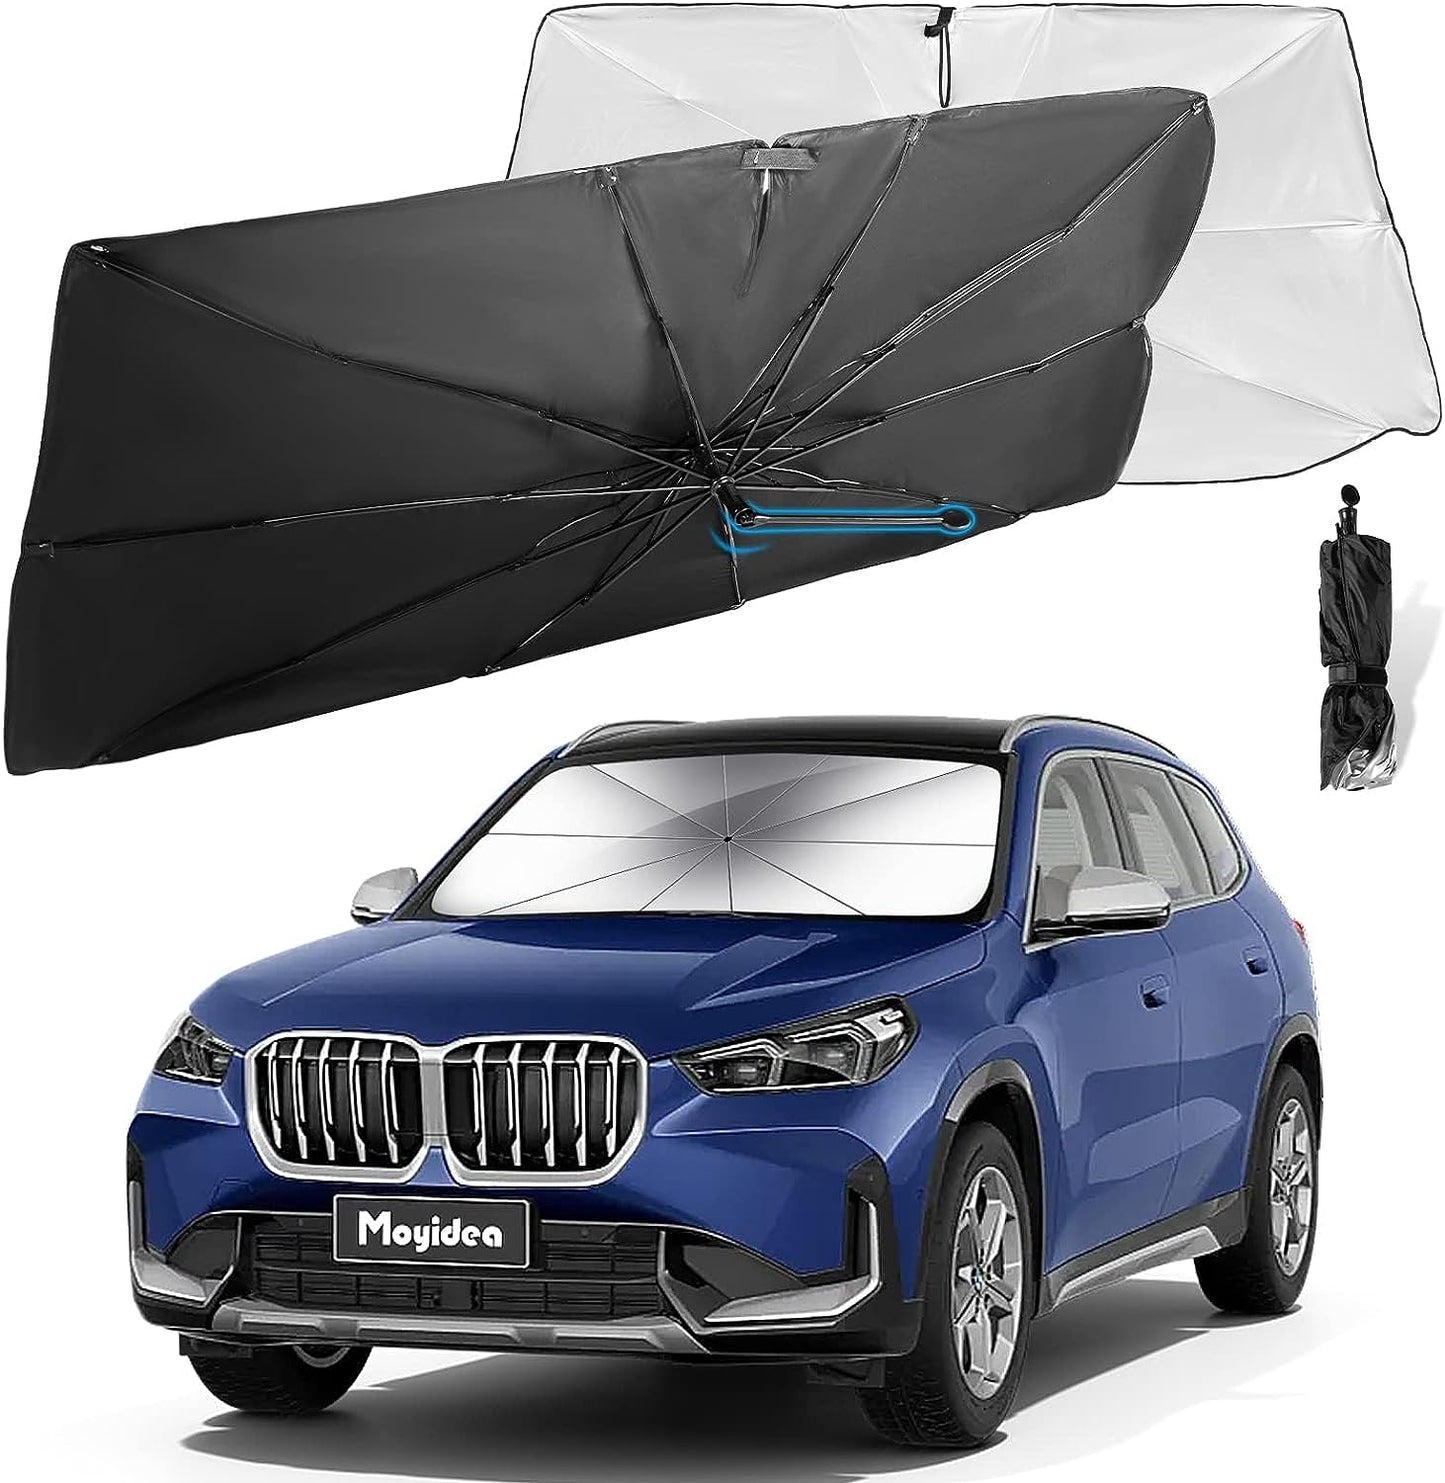 THE Moyidea Car Windshield Sun Shade - Foldable Umbrella Reflective Sunshade for Car Front Window Block UV Rays and Heat Car Visor Keep Vehicle Cool Cover Most Cars, SUV, Truck for Auto Windshield